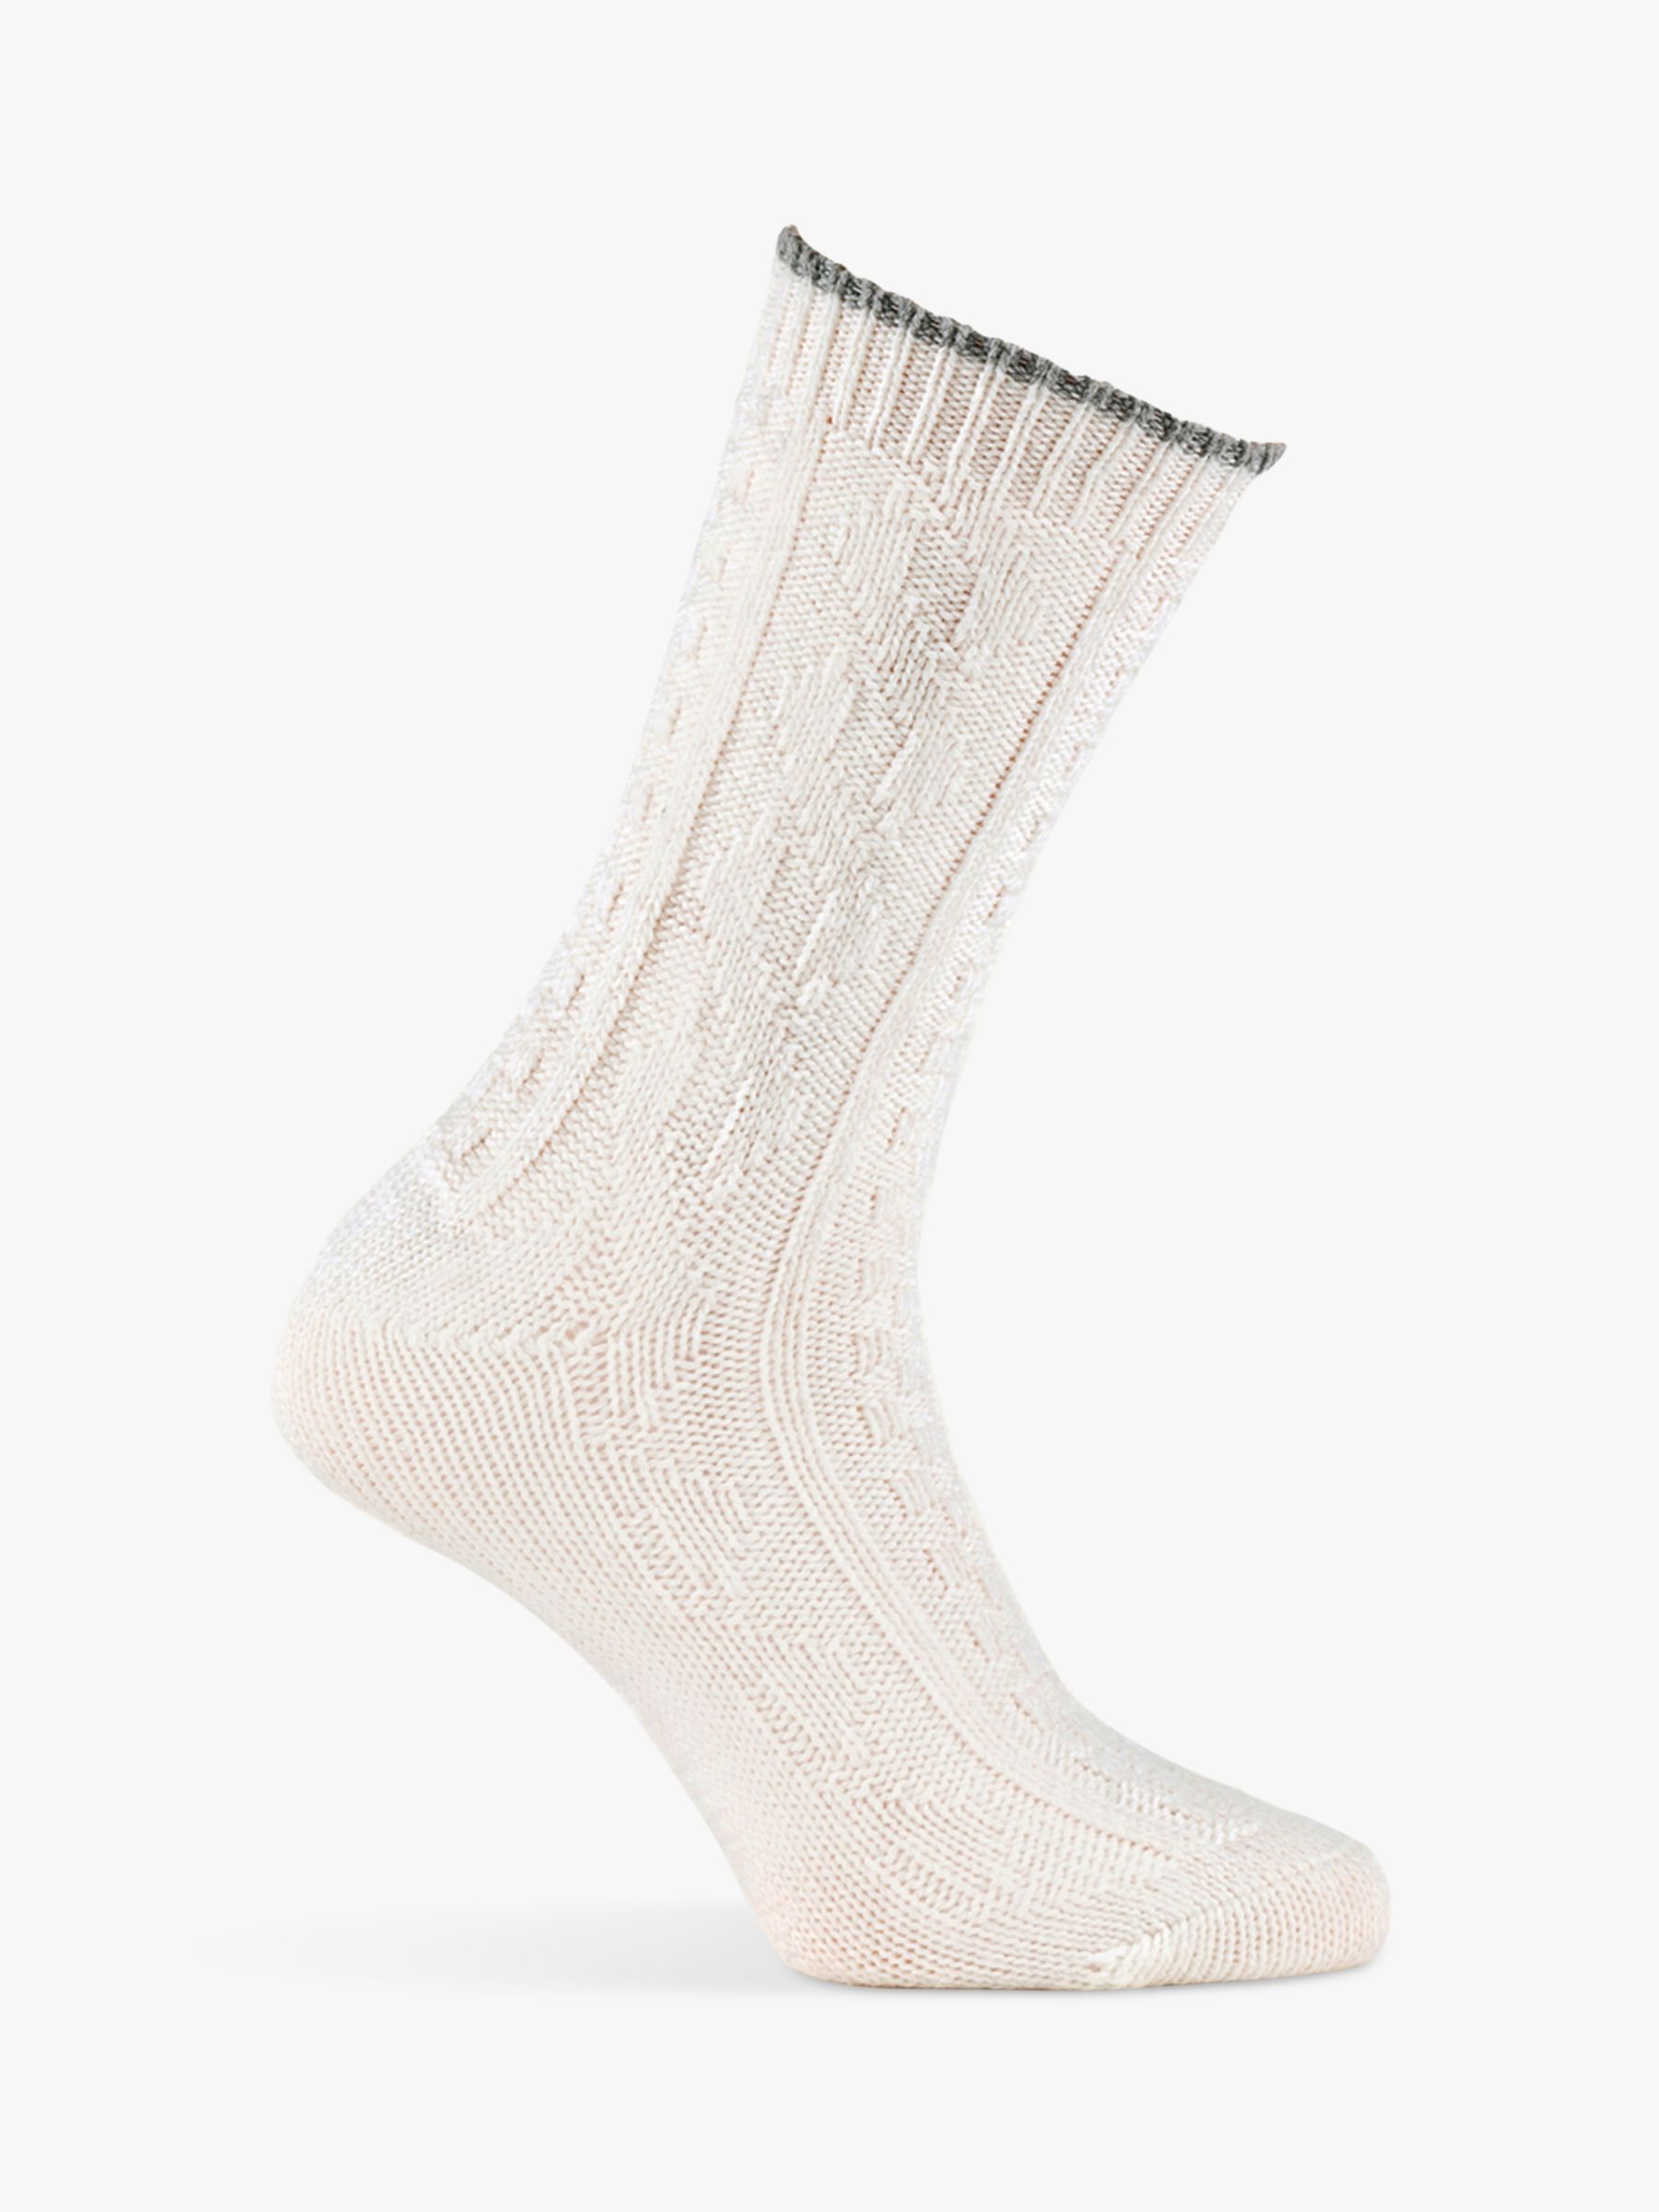 totes Cashmere Blend Slouch Socks, Cream, One Size